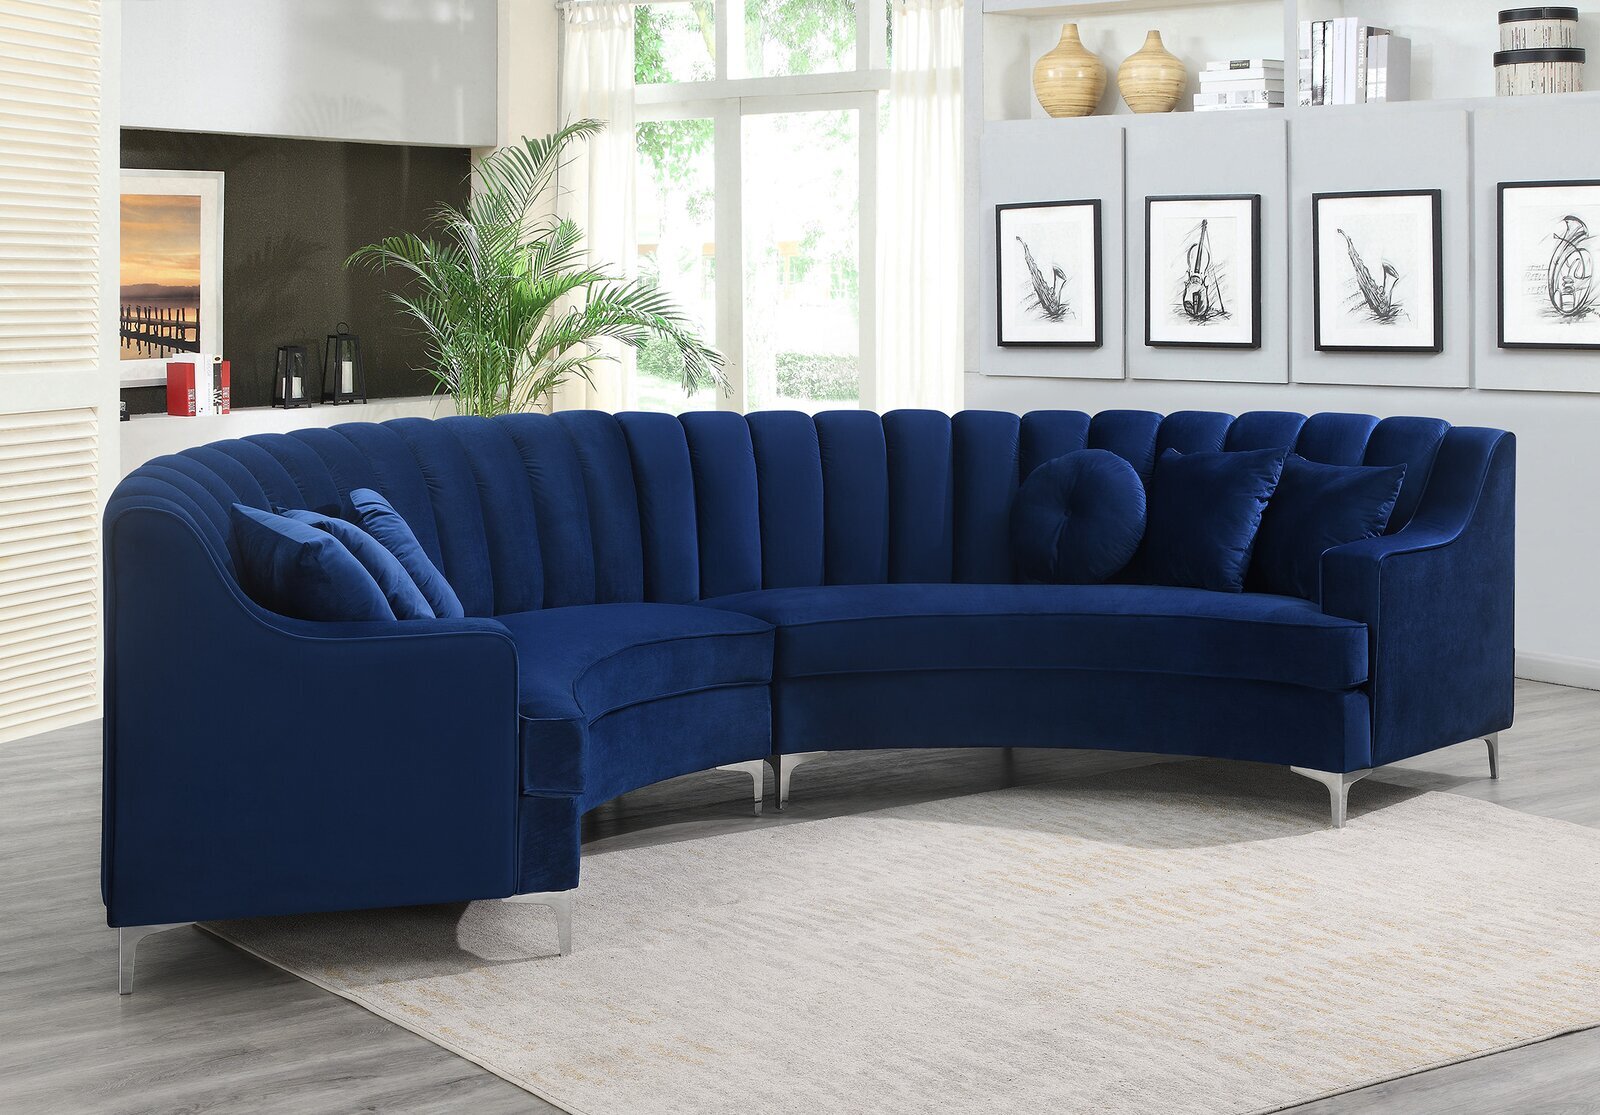 Two Piece Blue Velvet Curved Sectional Sofa